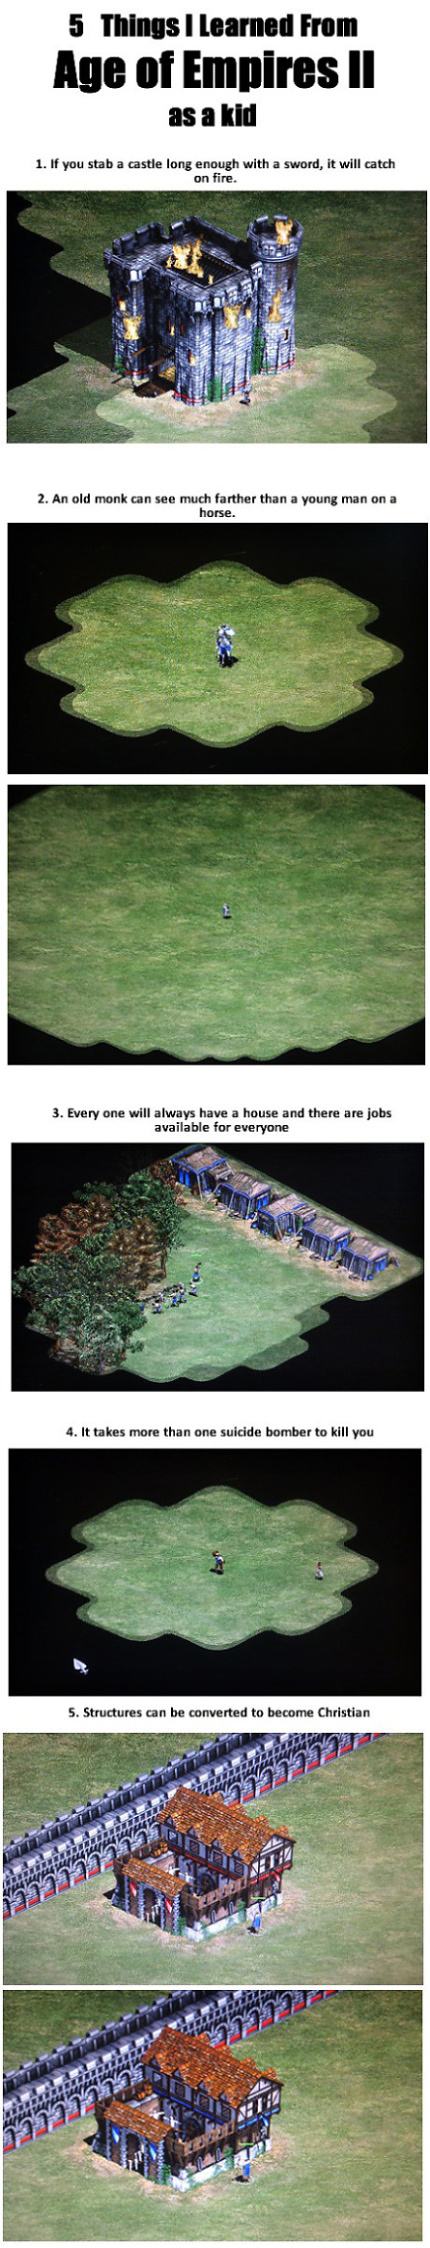 Obrázek 5 things that I learned from Age of Empires II 16-03-2012